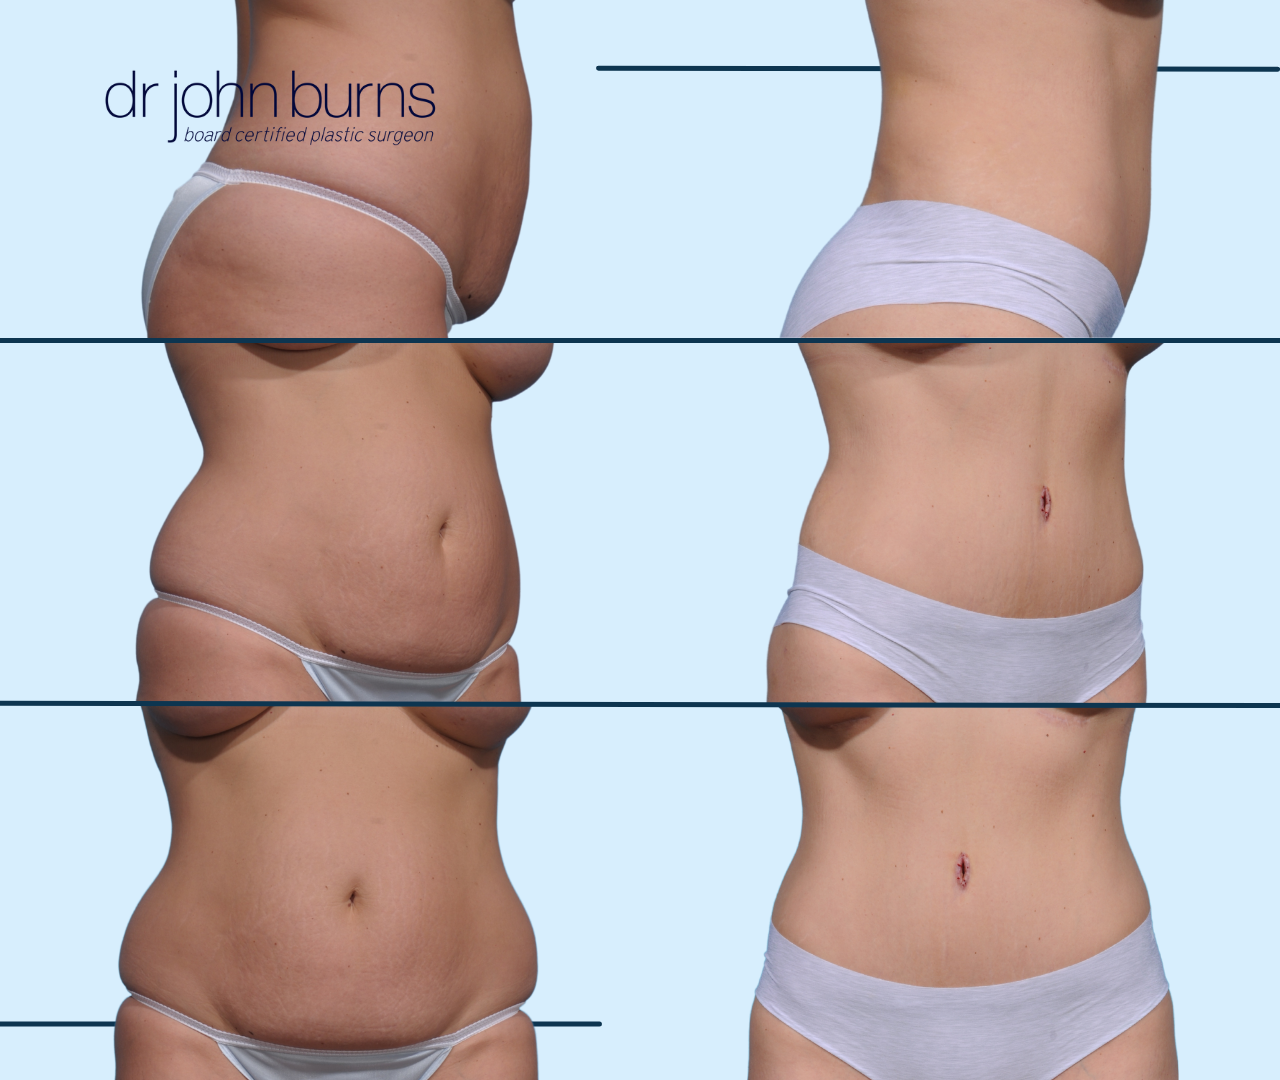 Case 26- Before & After Full Tummy Tuck with Lipo by Dallas Plastic Surgeon, Dr. John Burns